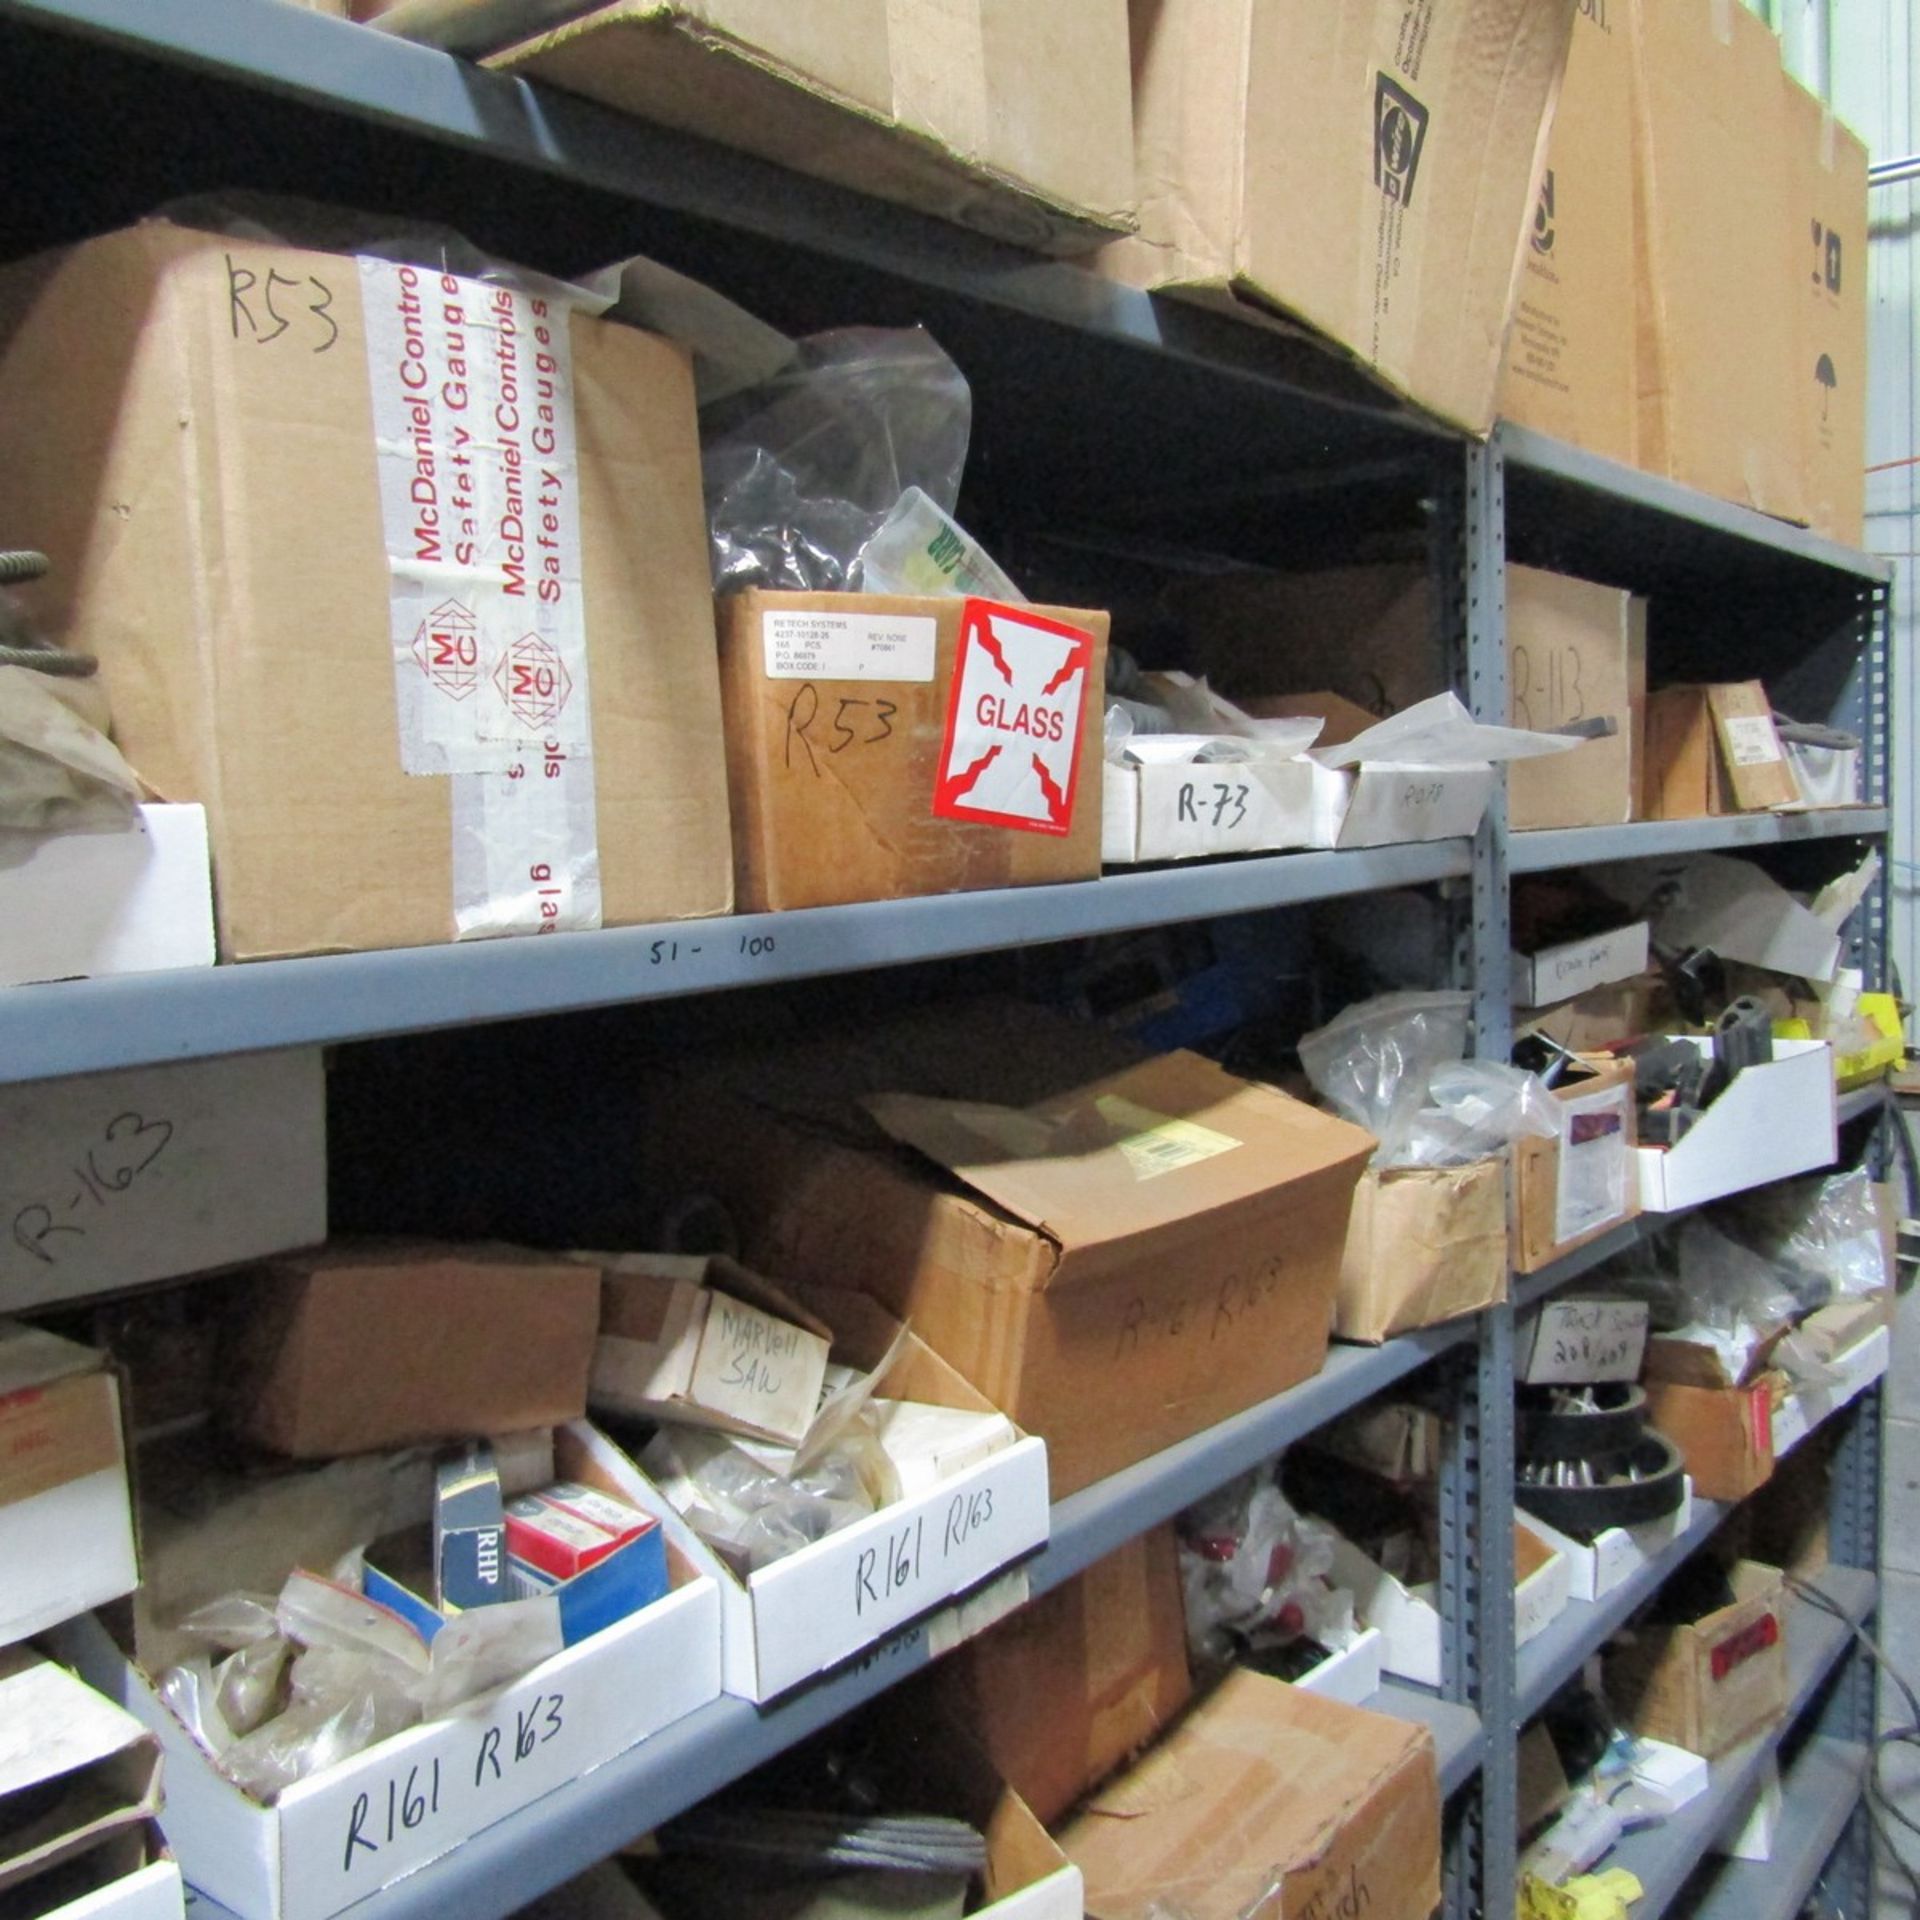 Shelving Units with Contents to Include 74" x 48", Pumps, Connectors, Plugs, Oil Filters, Fittings - Image 12 of 15